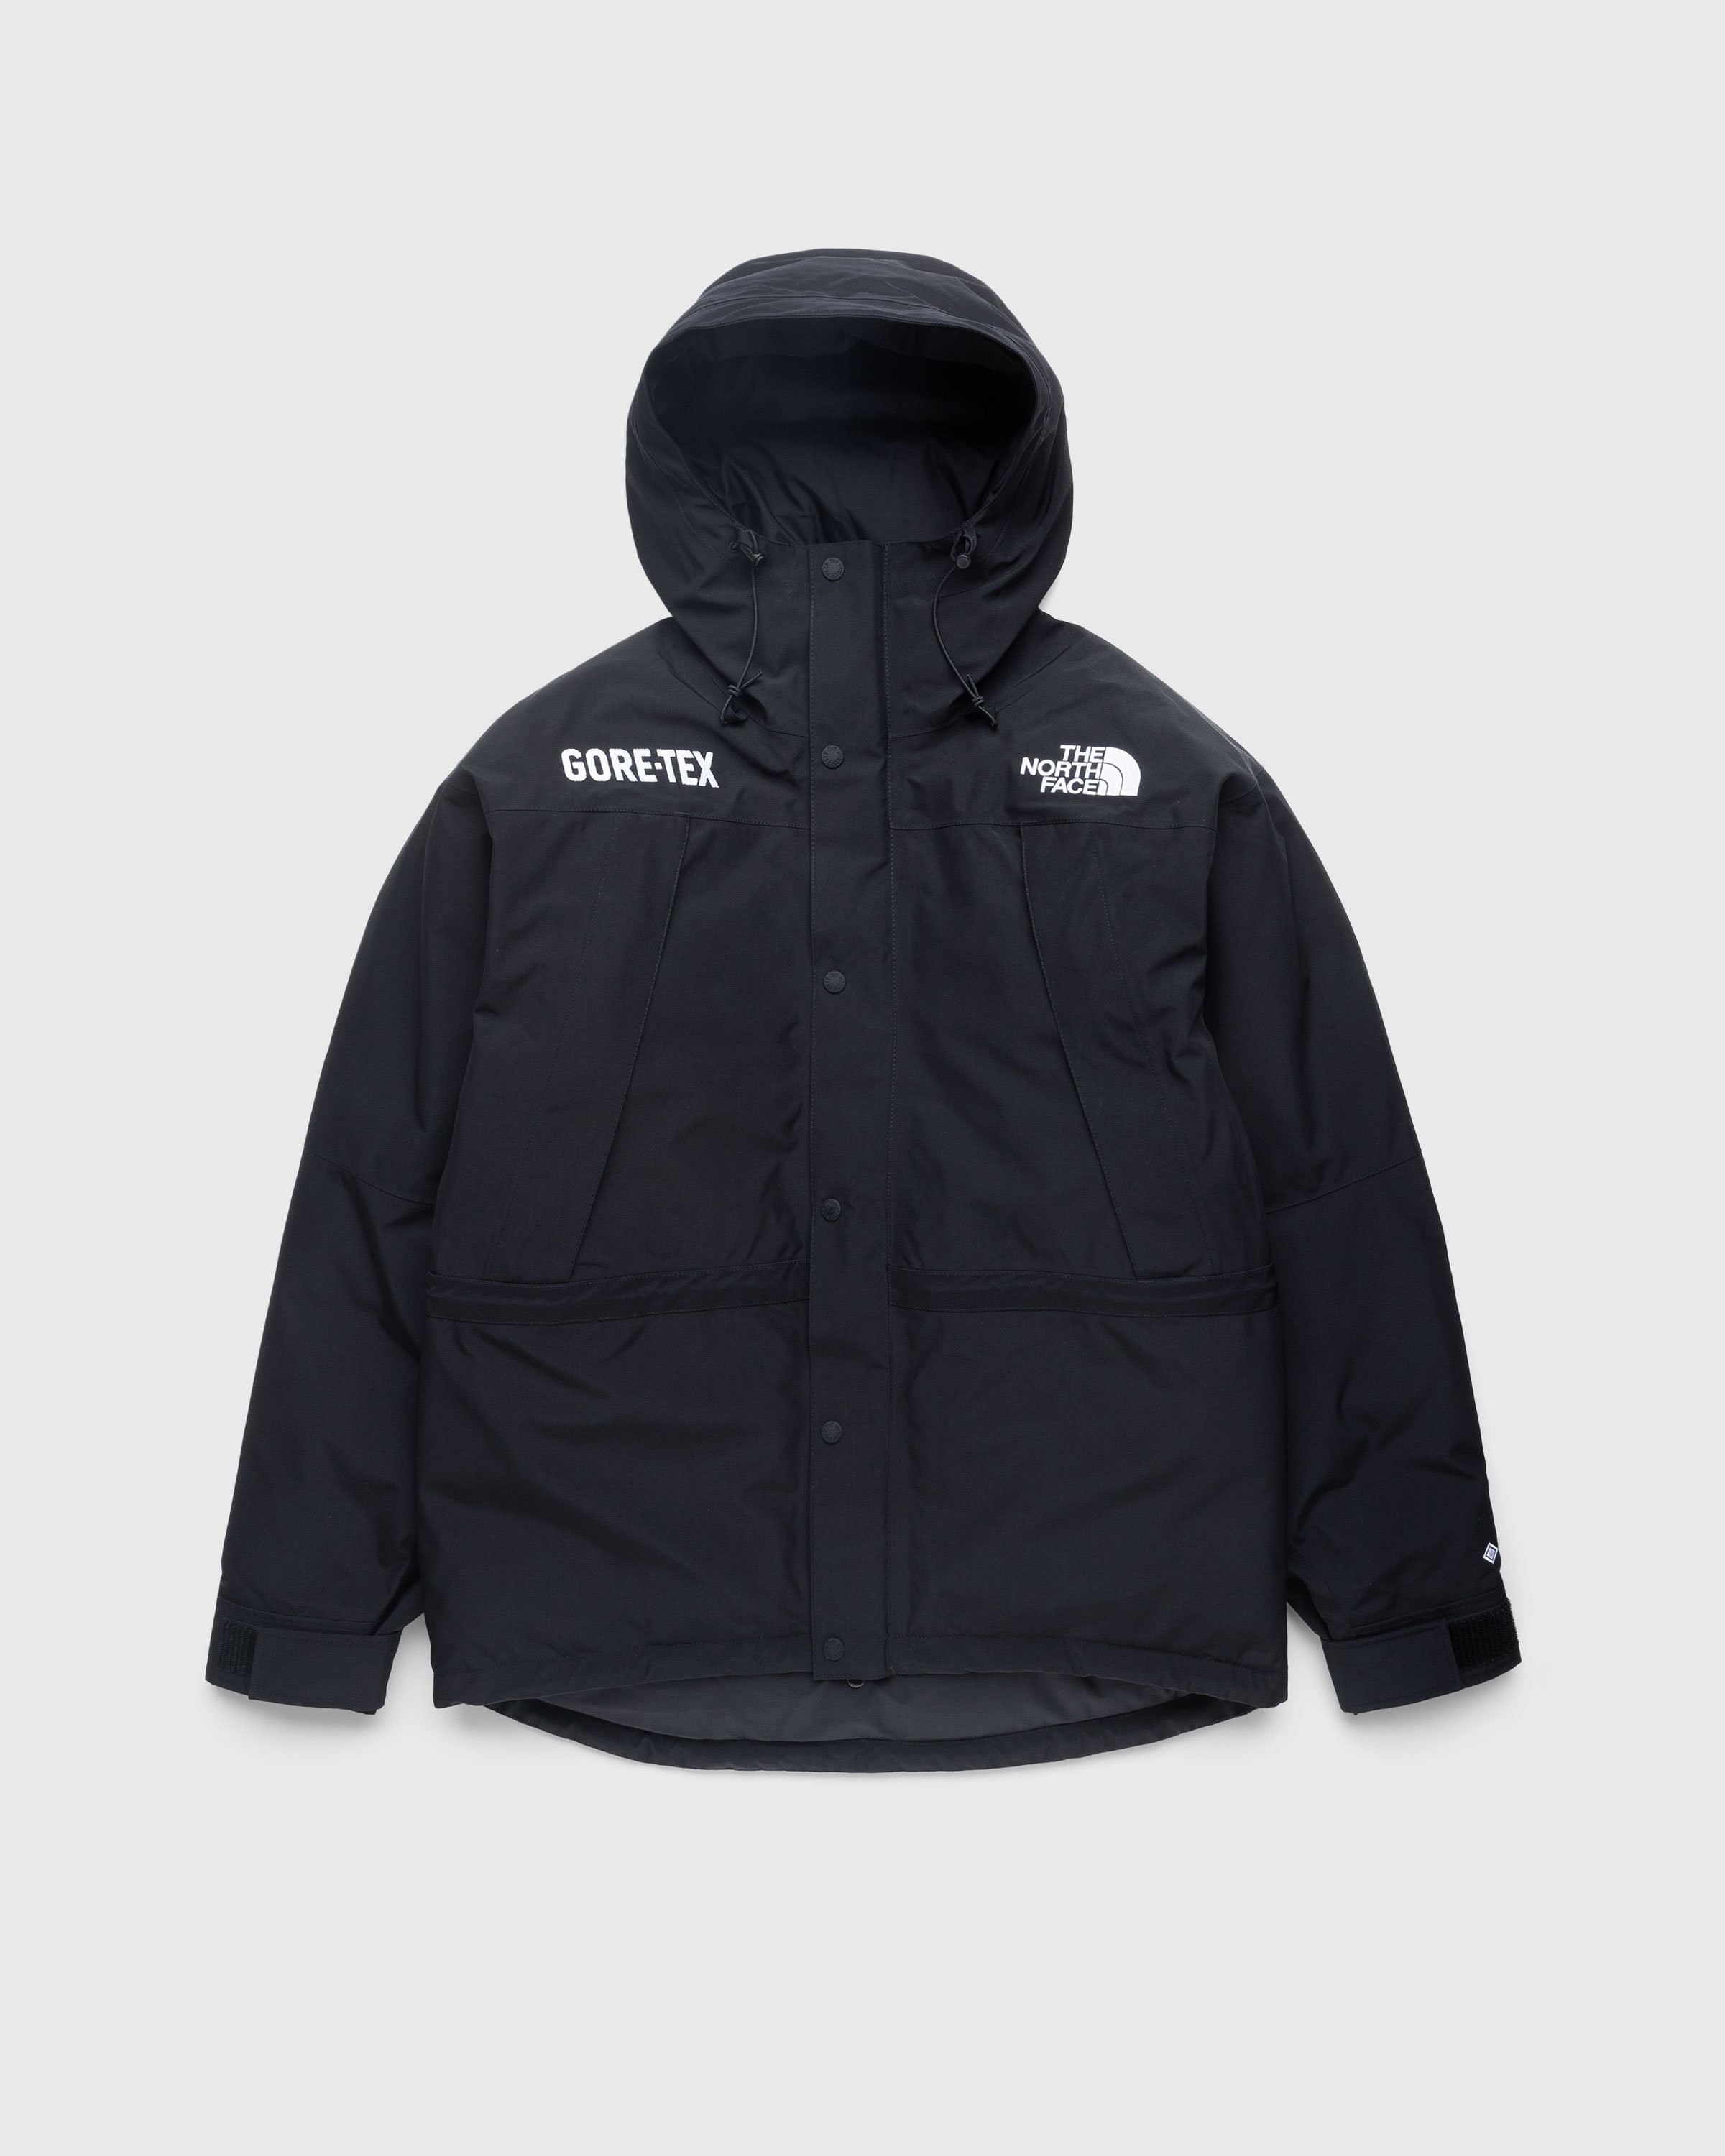 The North Face – GORE-TEX Mountain Guide Insulated Jacket Black - Outerwear - Black - Image 1